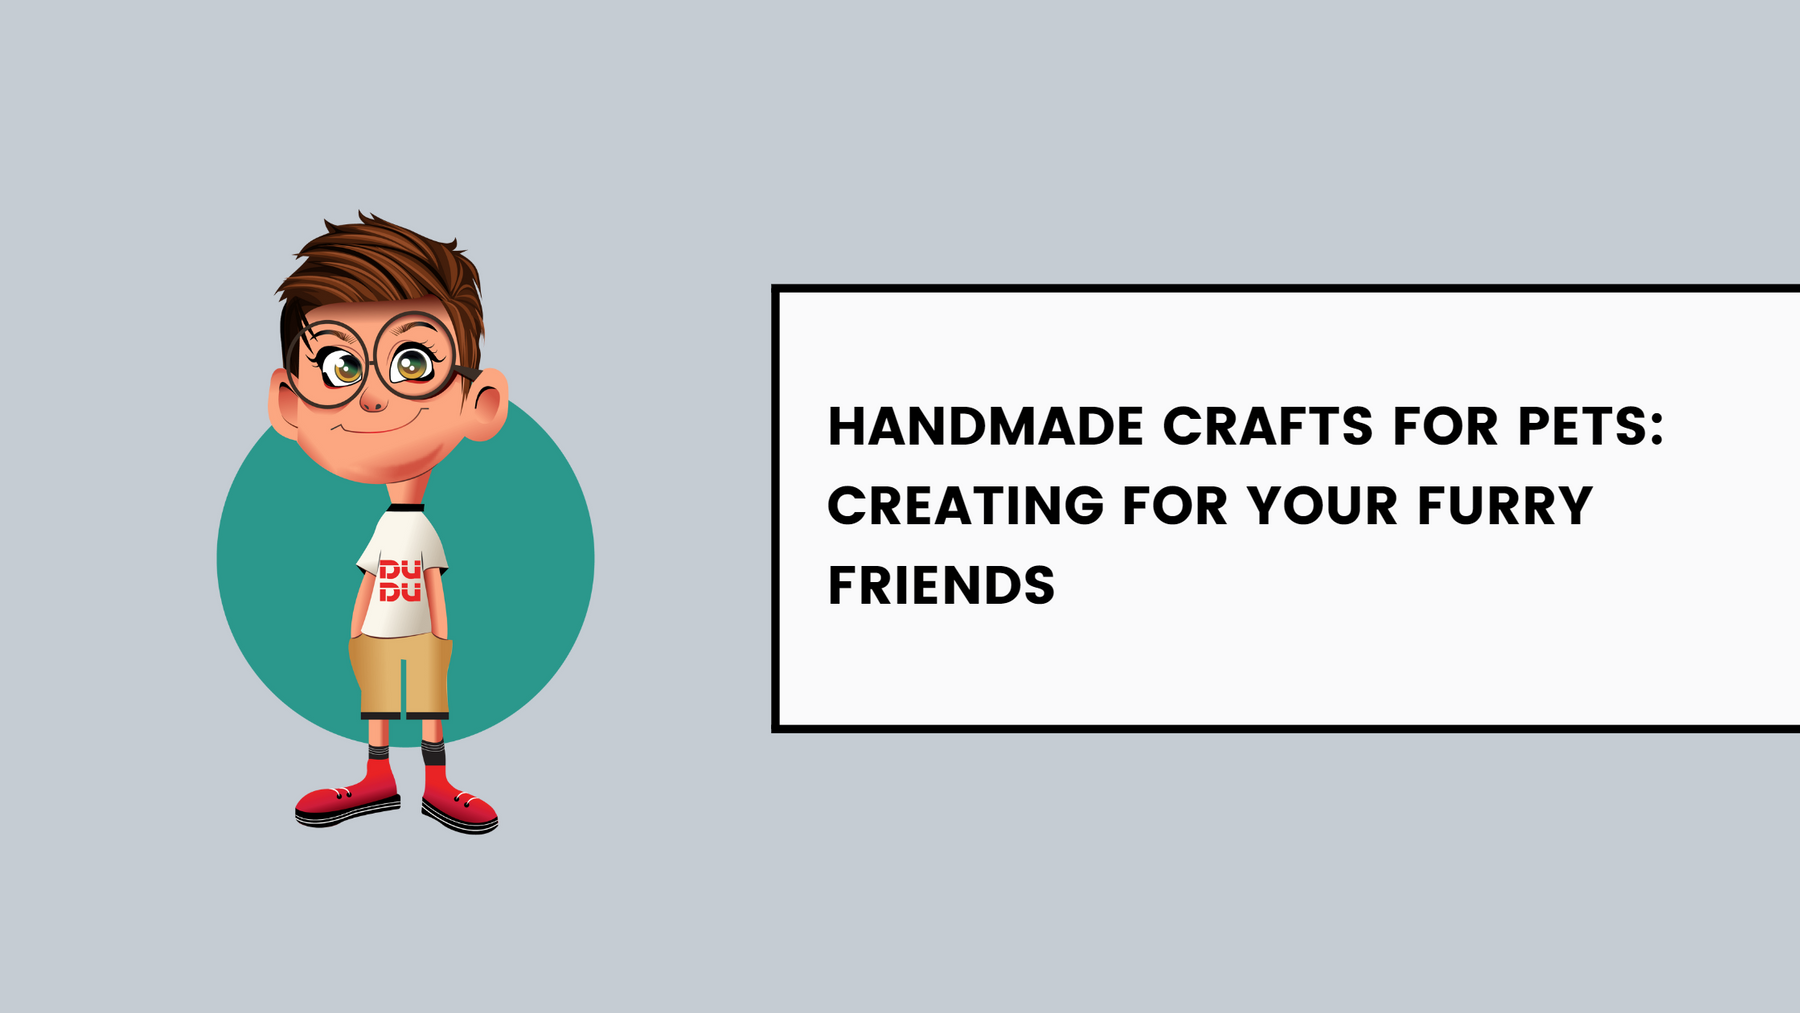 Handmade Crafts For Pets: Creating For Your Furry Friends